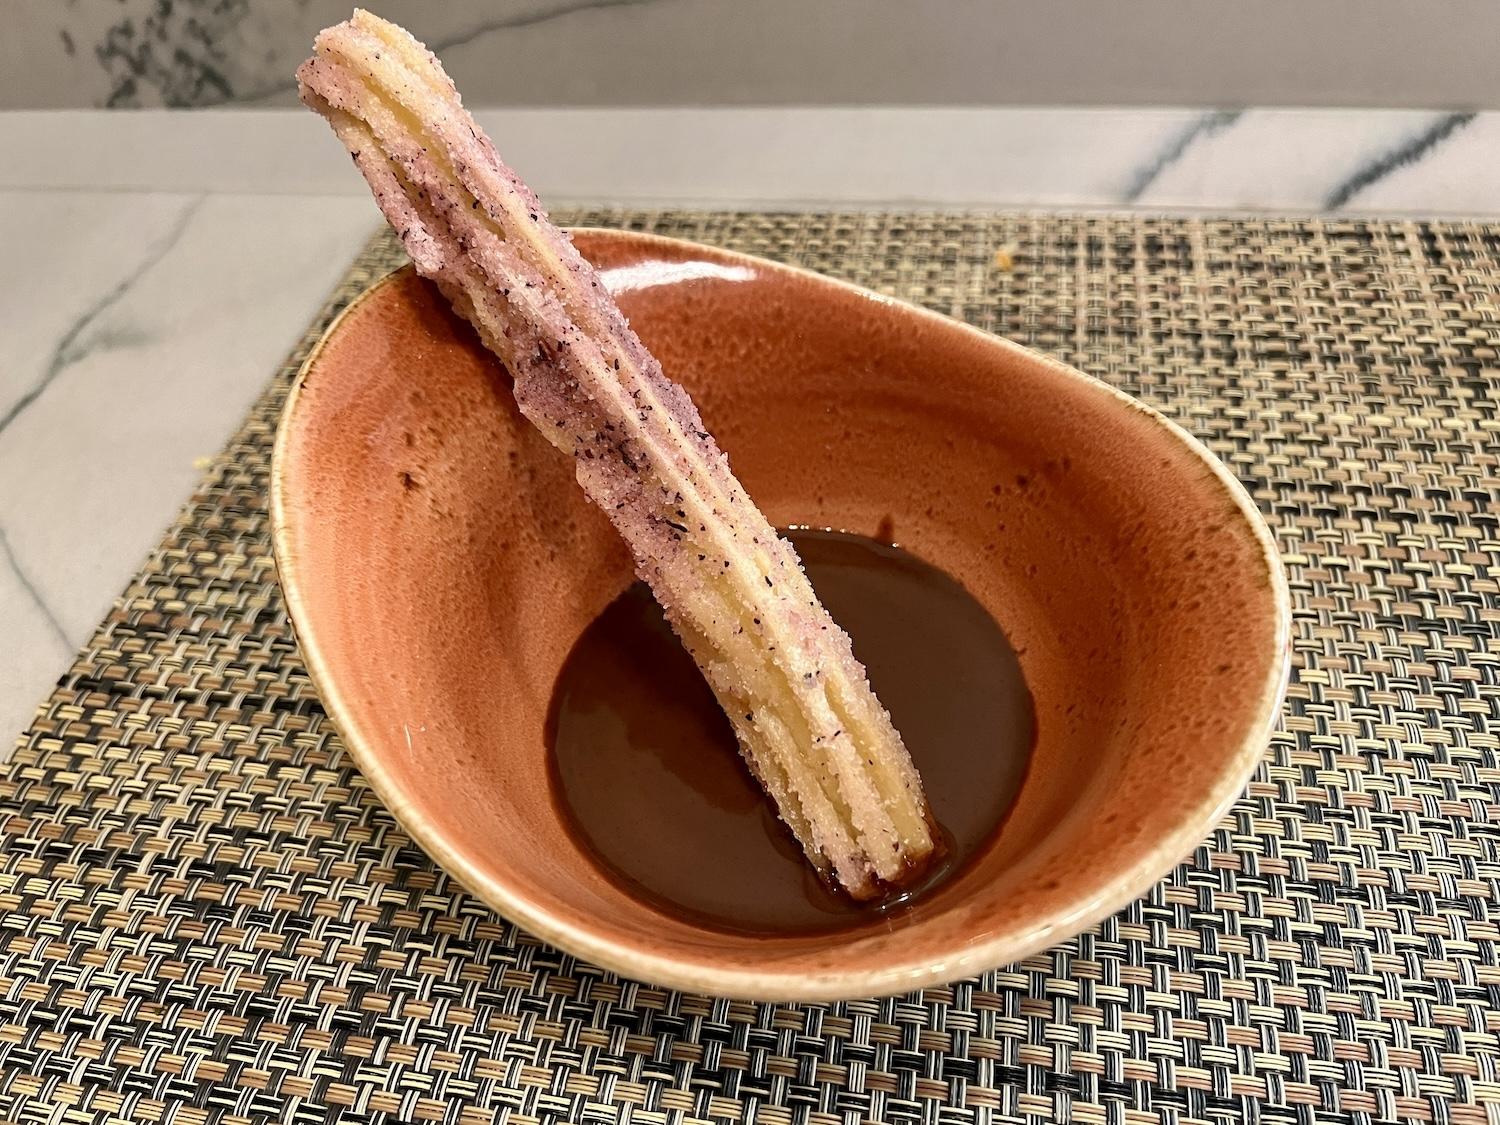 On the Star Pride, Cuadro 44 by Anthony Sasso serves churros with a hot chocolate dipping sauce.